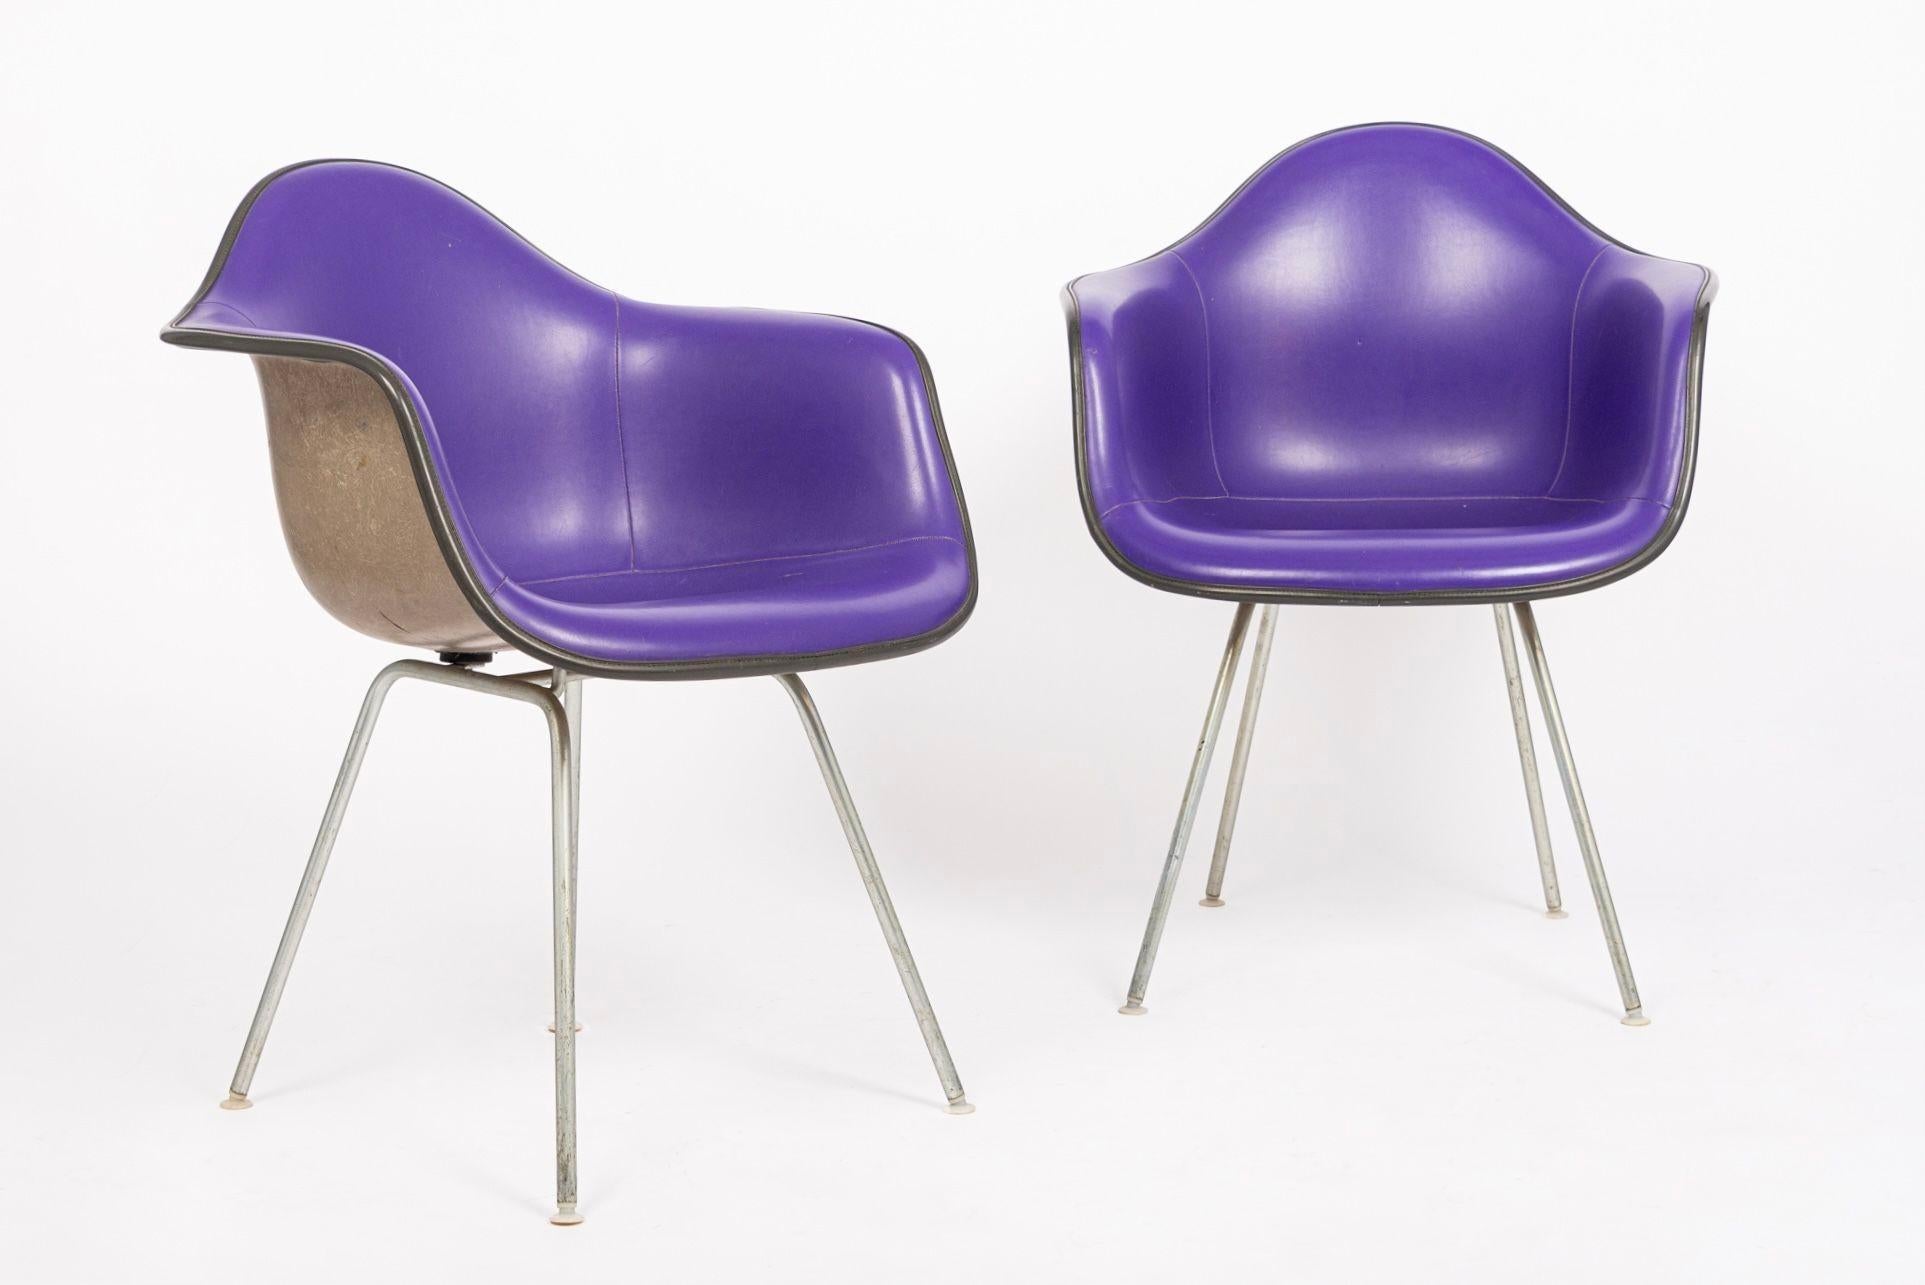 These vintage mid century modern DAX bucket purple lounge chairs were designed by Charles and Ray Eames for Herman Miller. The iconic DAX chair - Dining (D) Arm Chair (A) on X Base (X) - was designed by the Eameses for Herman Miller in the 1950s and